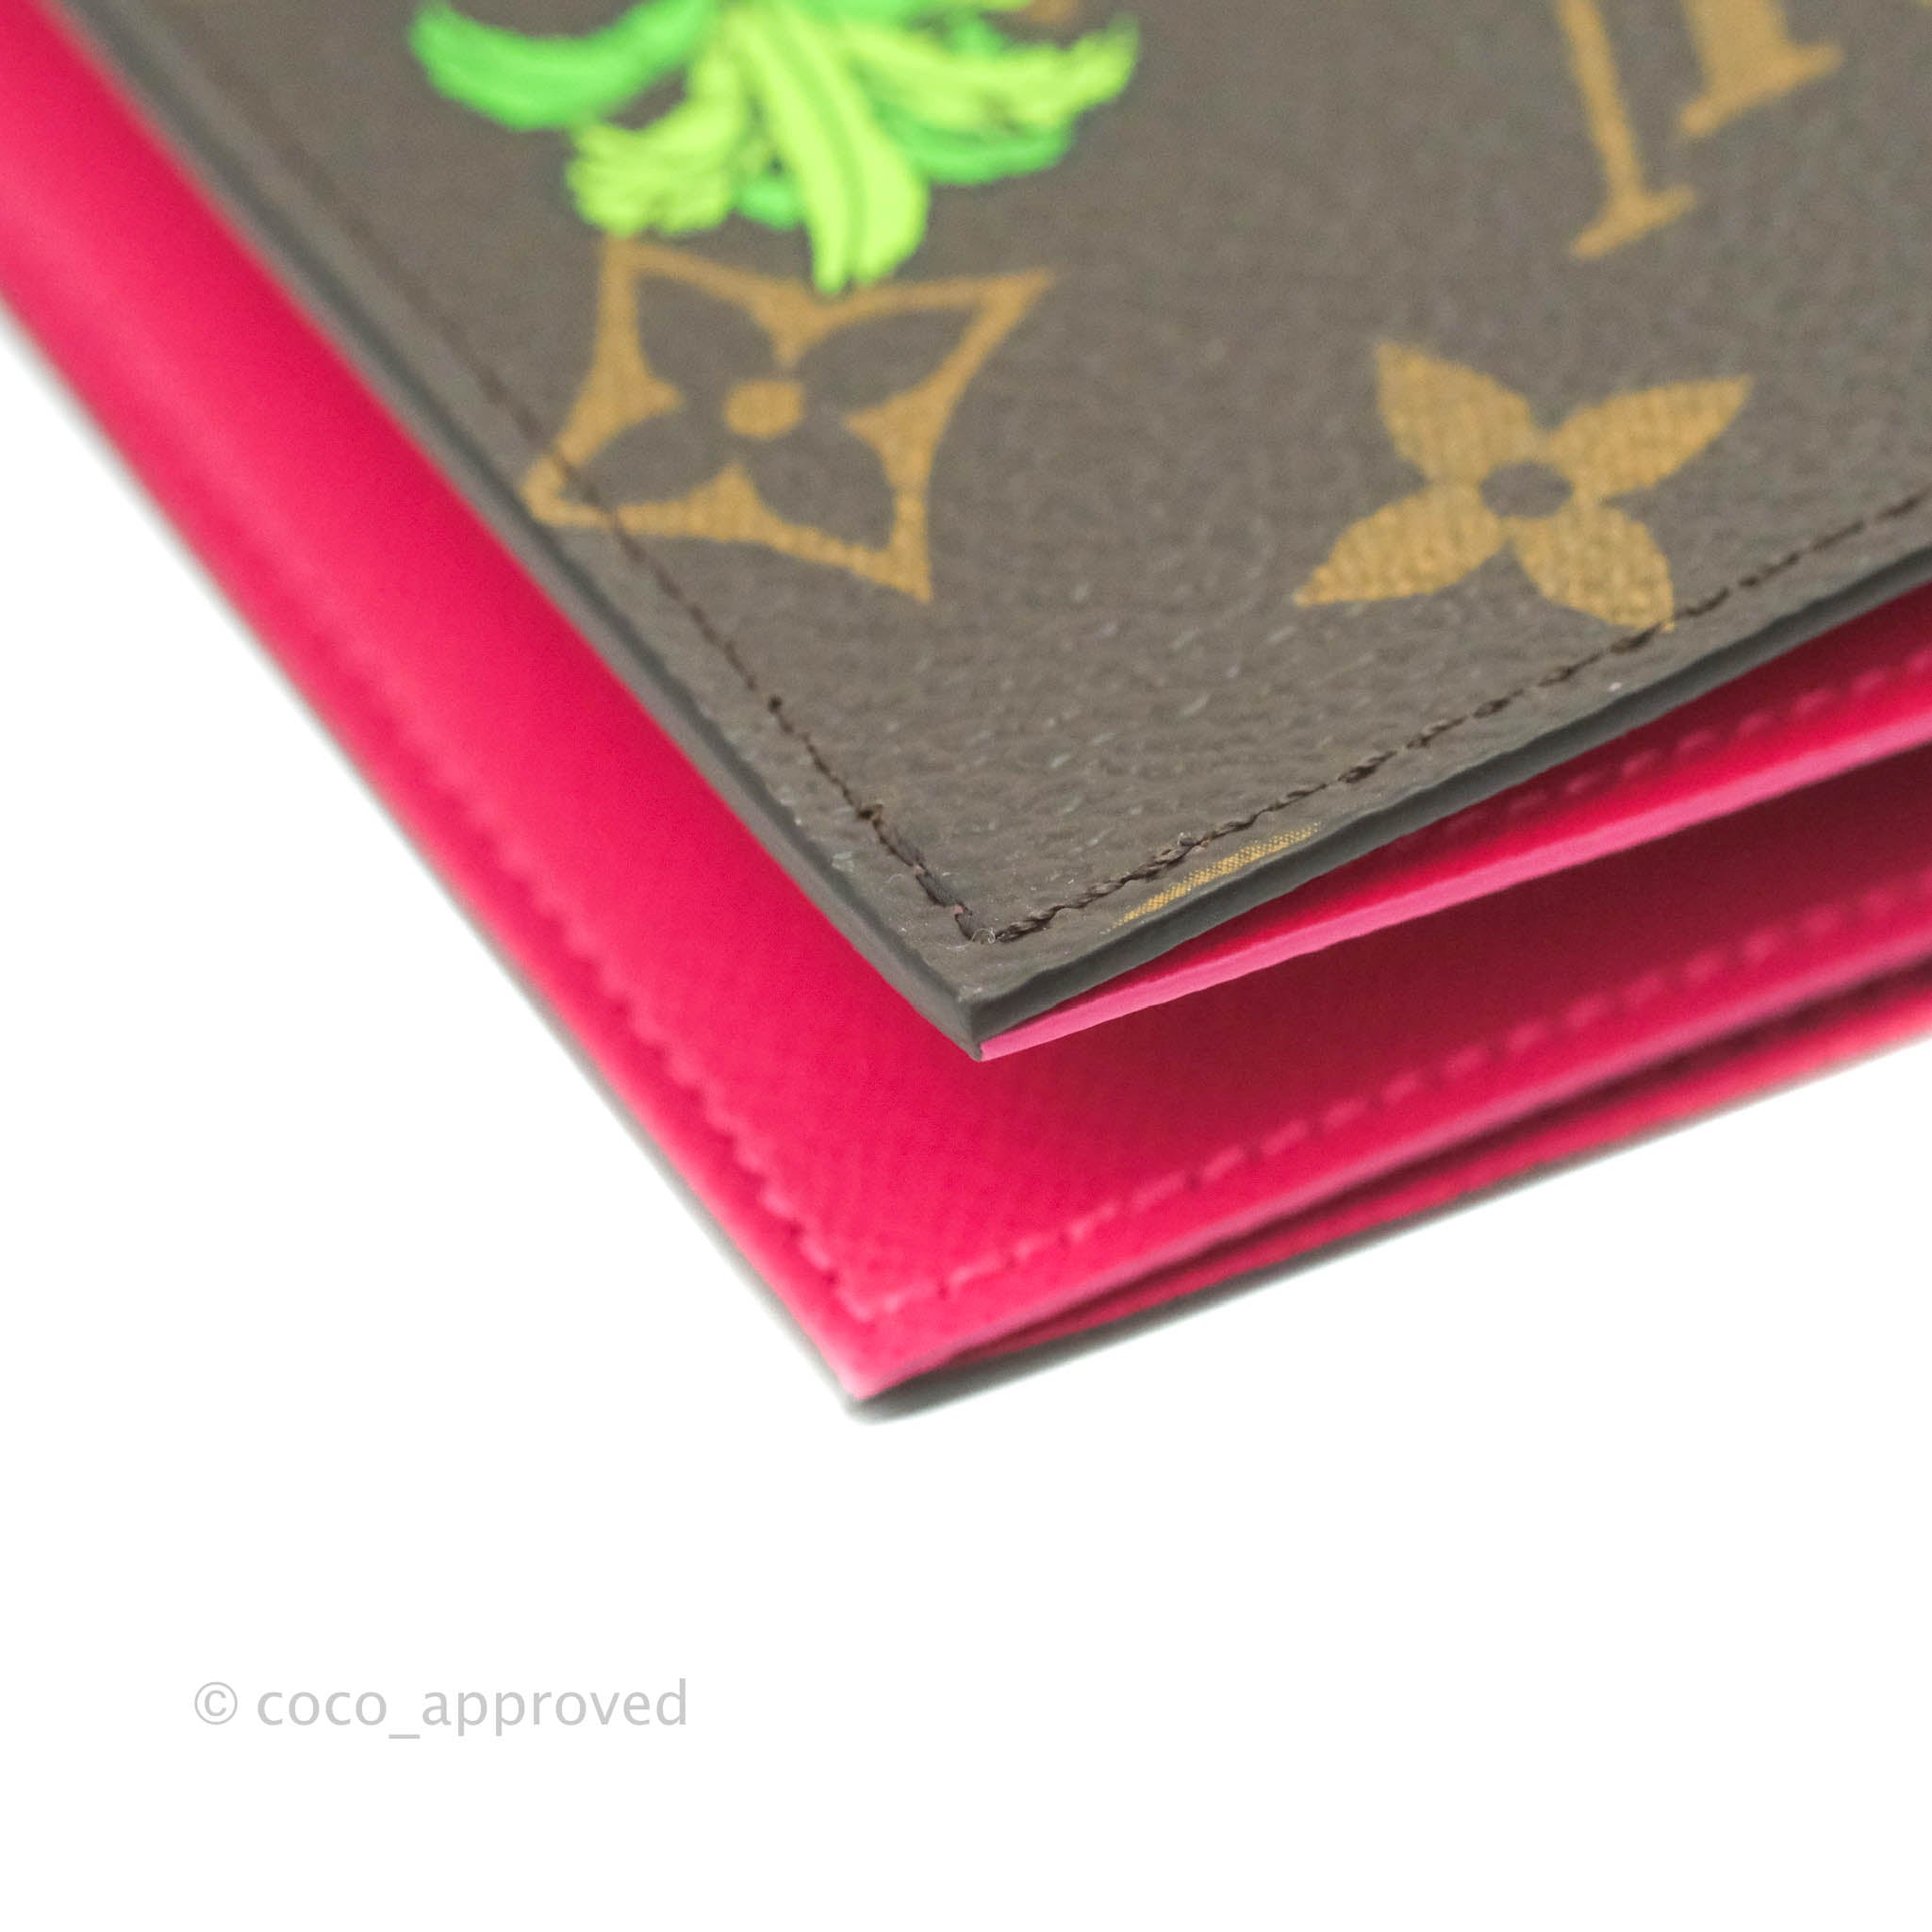 Louis Vuitton Monogram 2022 Christmas Animation Passport Cover - $789 New  With Tags - From Kaka